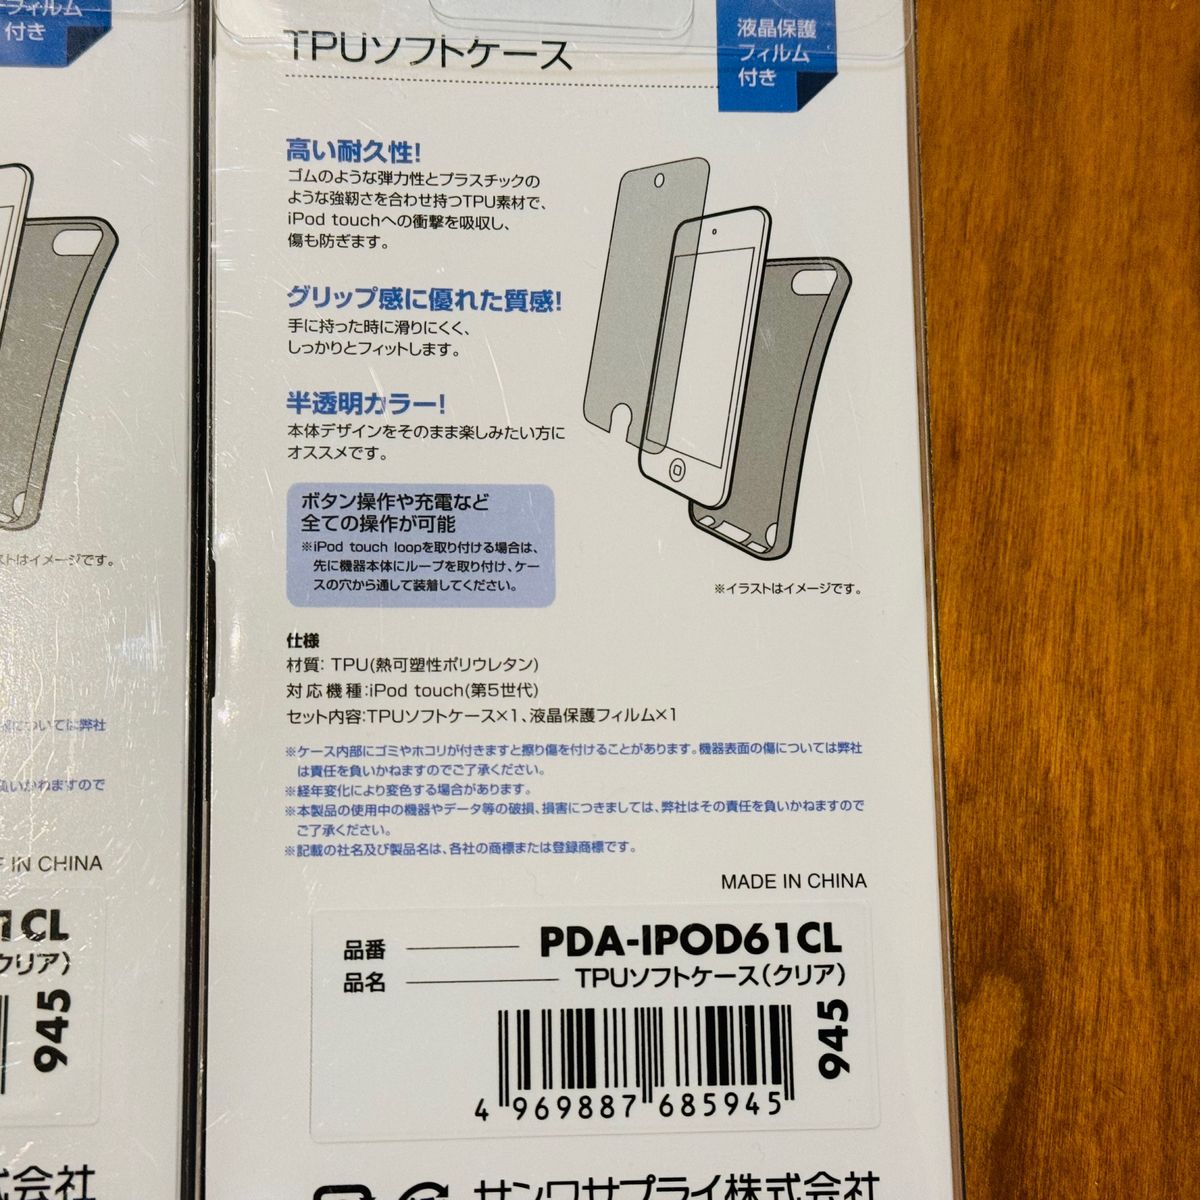 SANWA SUPPLY TPUソフトケース(iPod touch 第5世代用) クリア PDA-IPOD61CL 2個セット